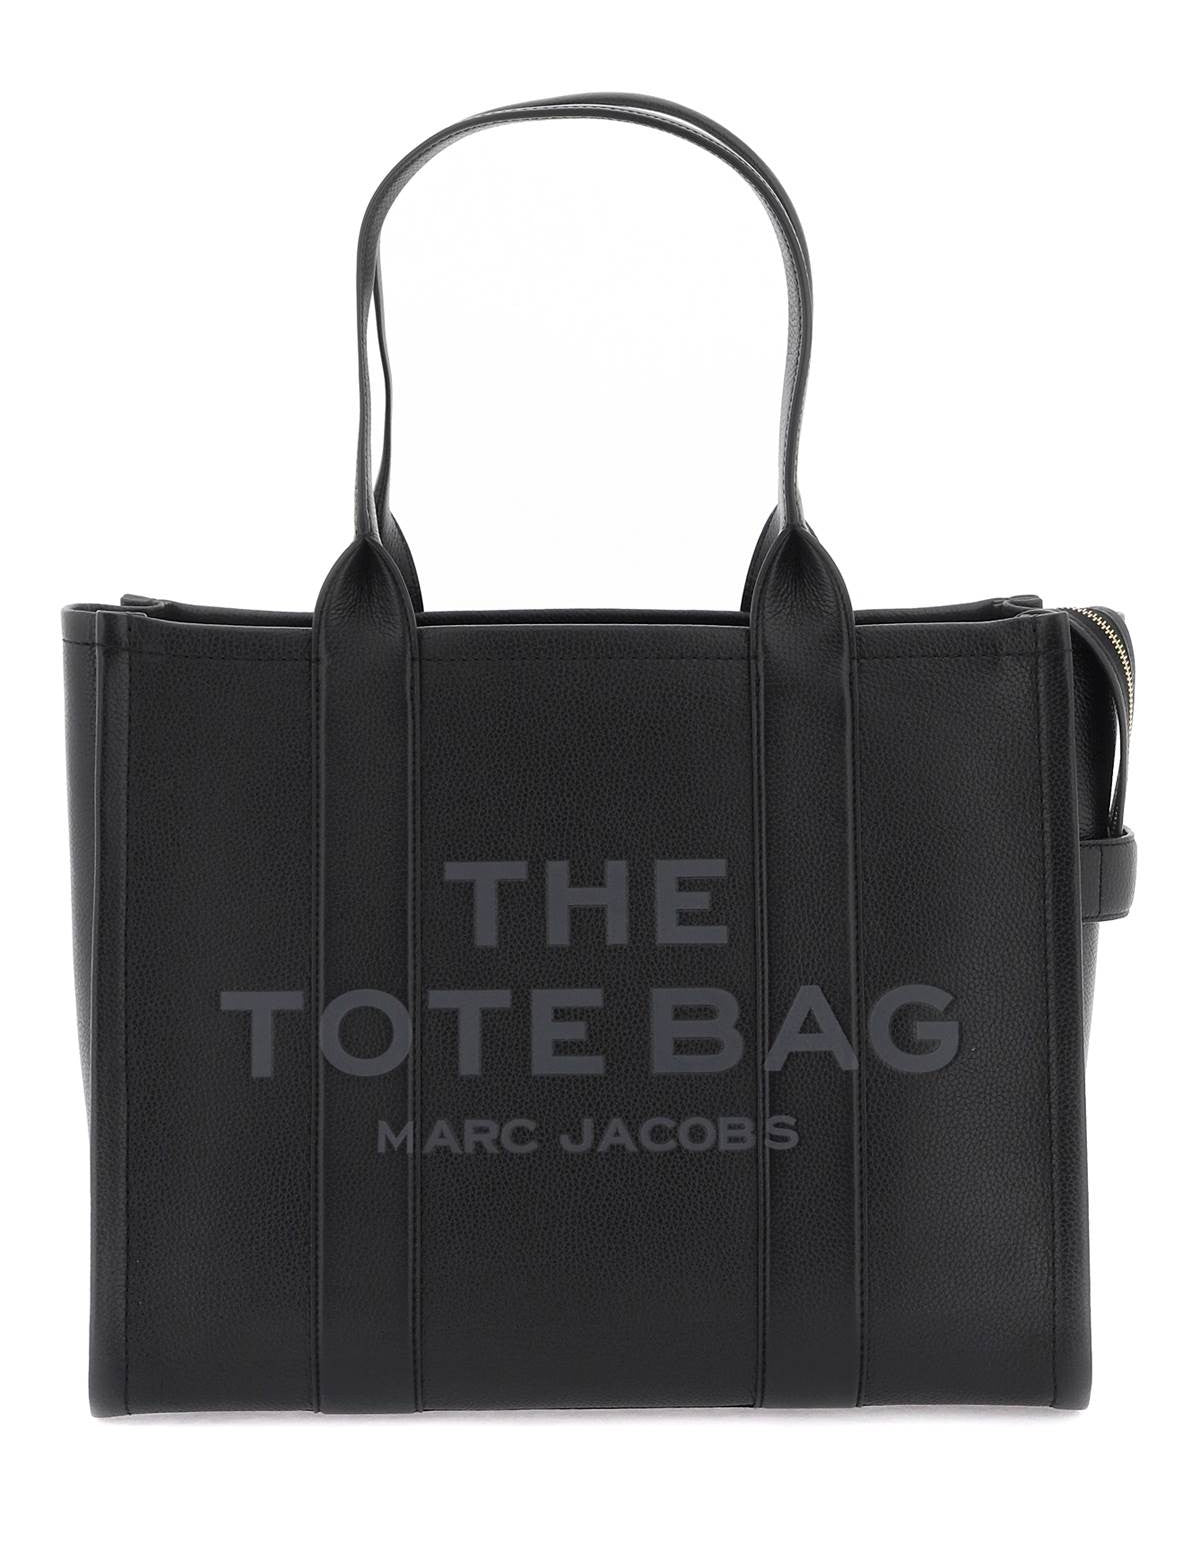 marc-jacobs-the-leather-large-tote-bag_b28eafb9-391a-43dd-a91b-afe10673113c.jpg